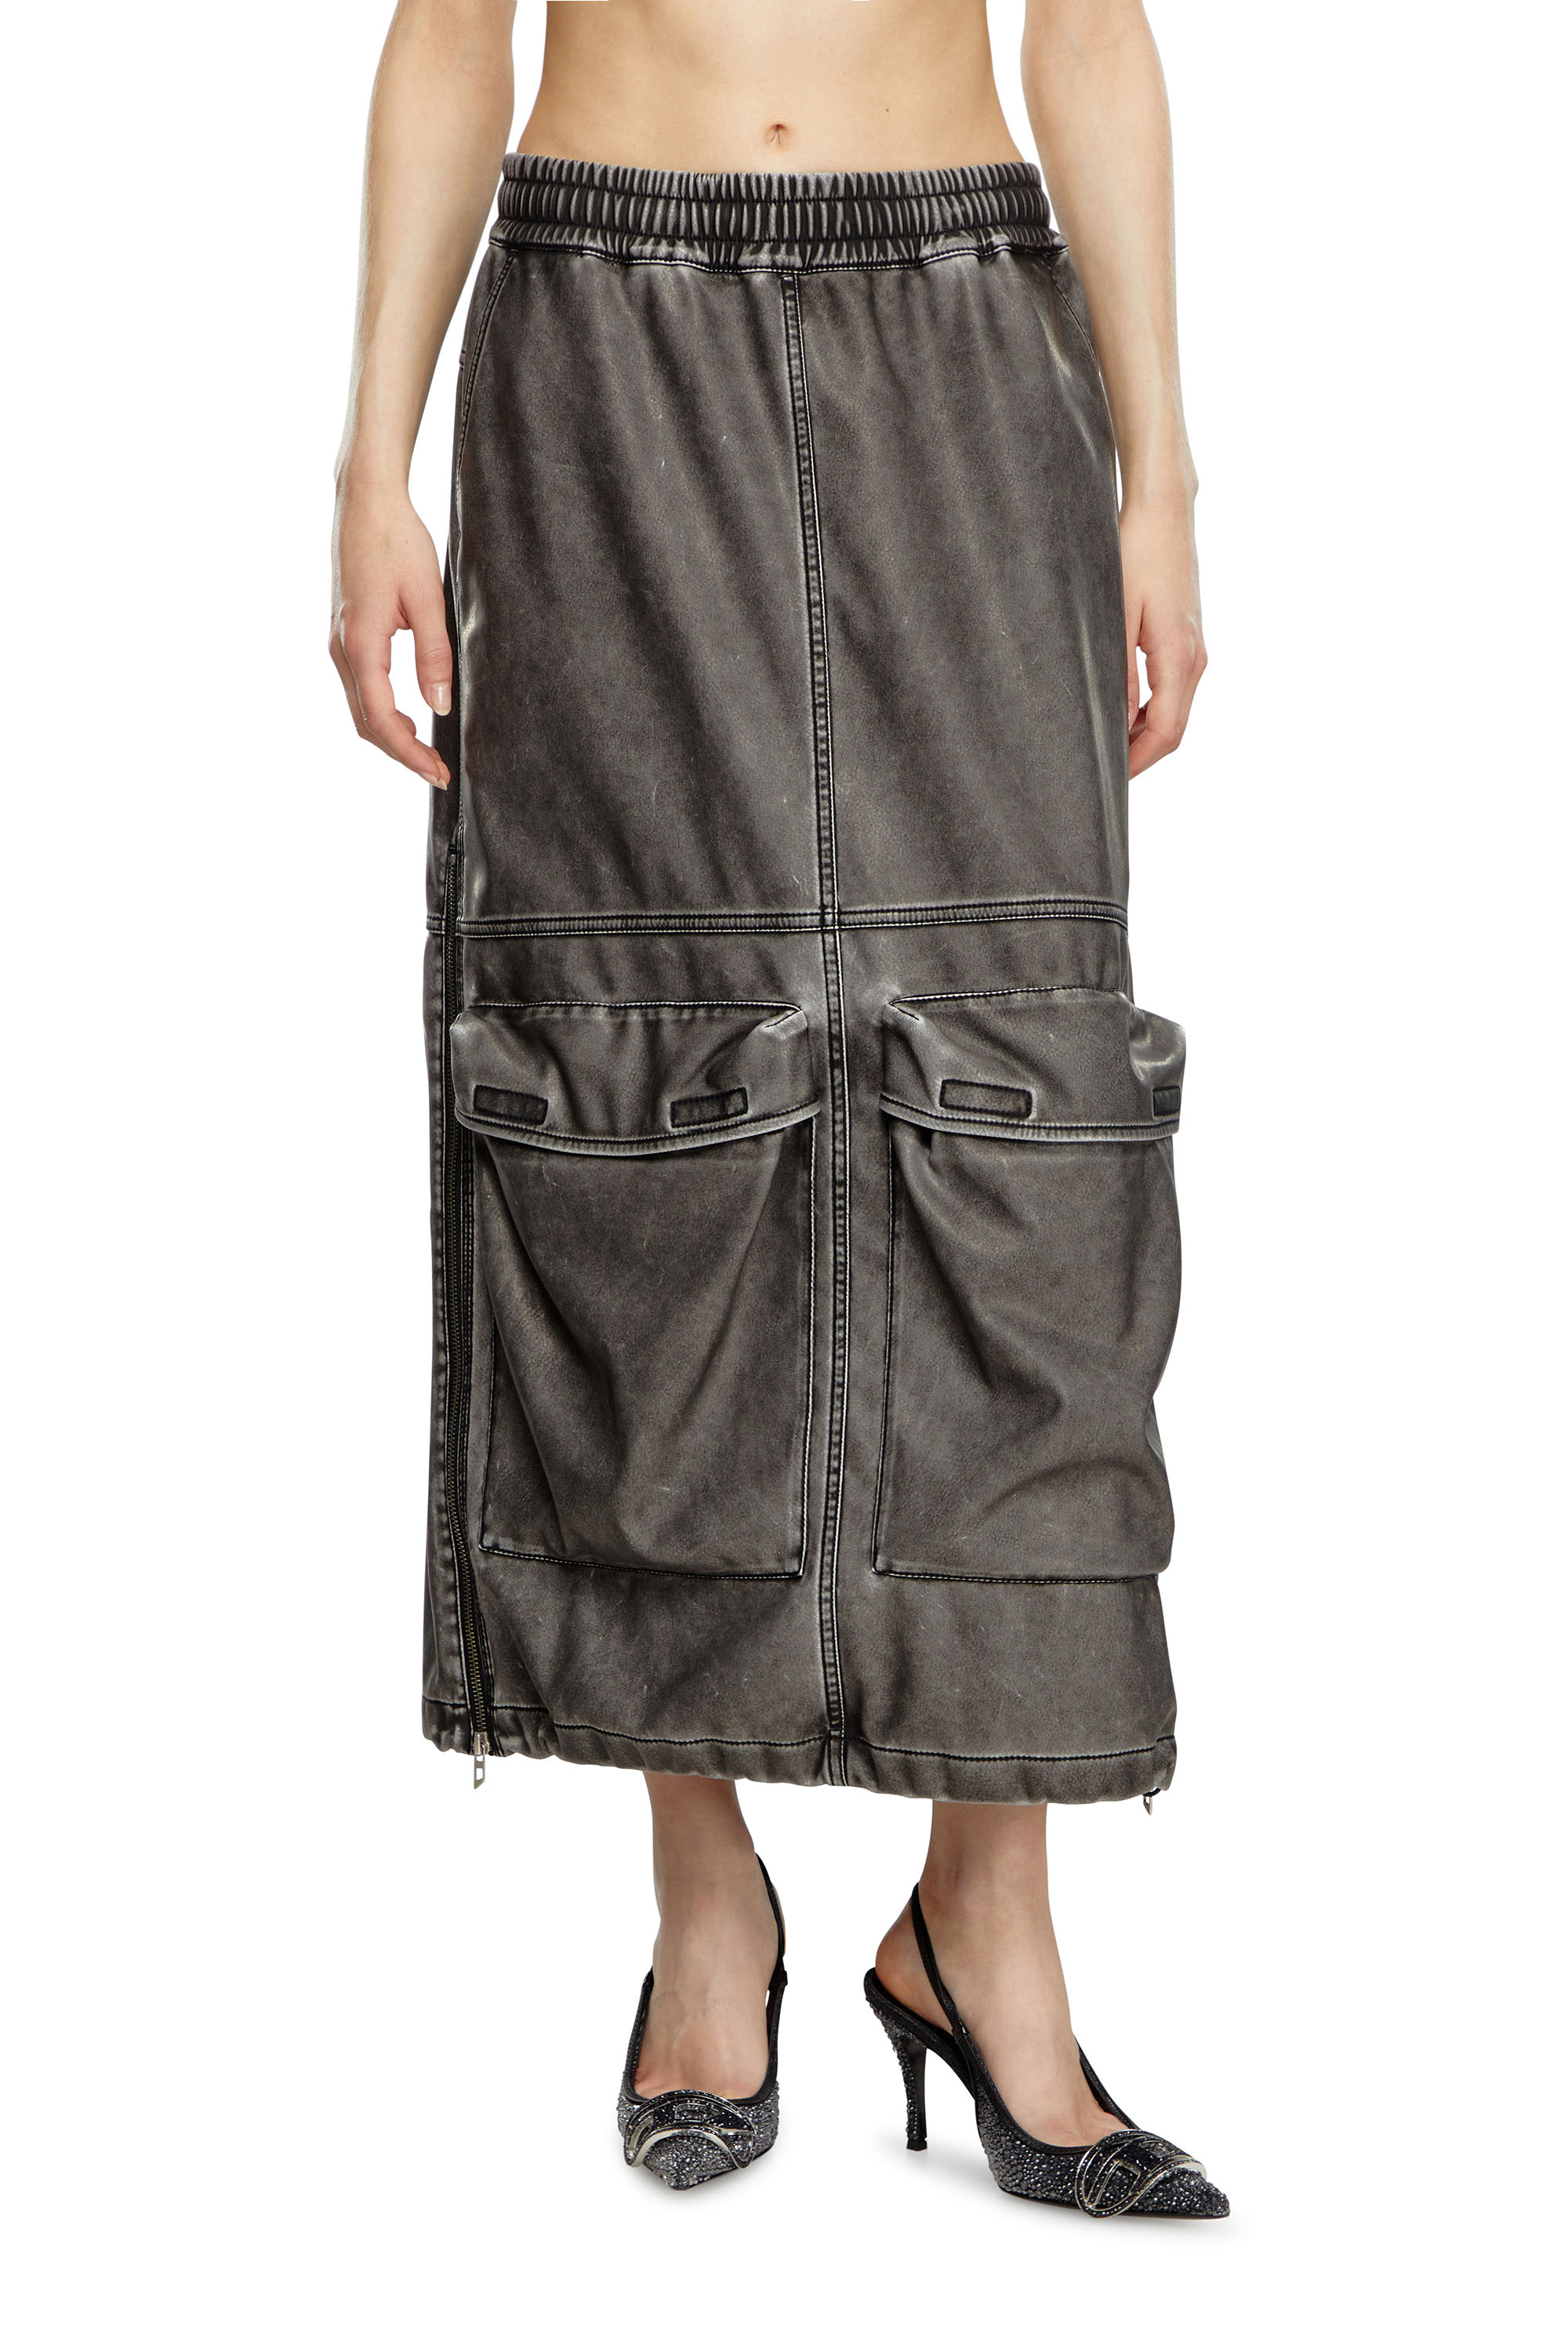 Diesel - O-DYSSEY-P1, Female Long skirt in washed tech fabric in グレー - Image 1